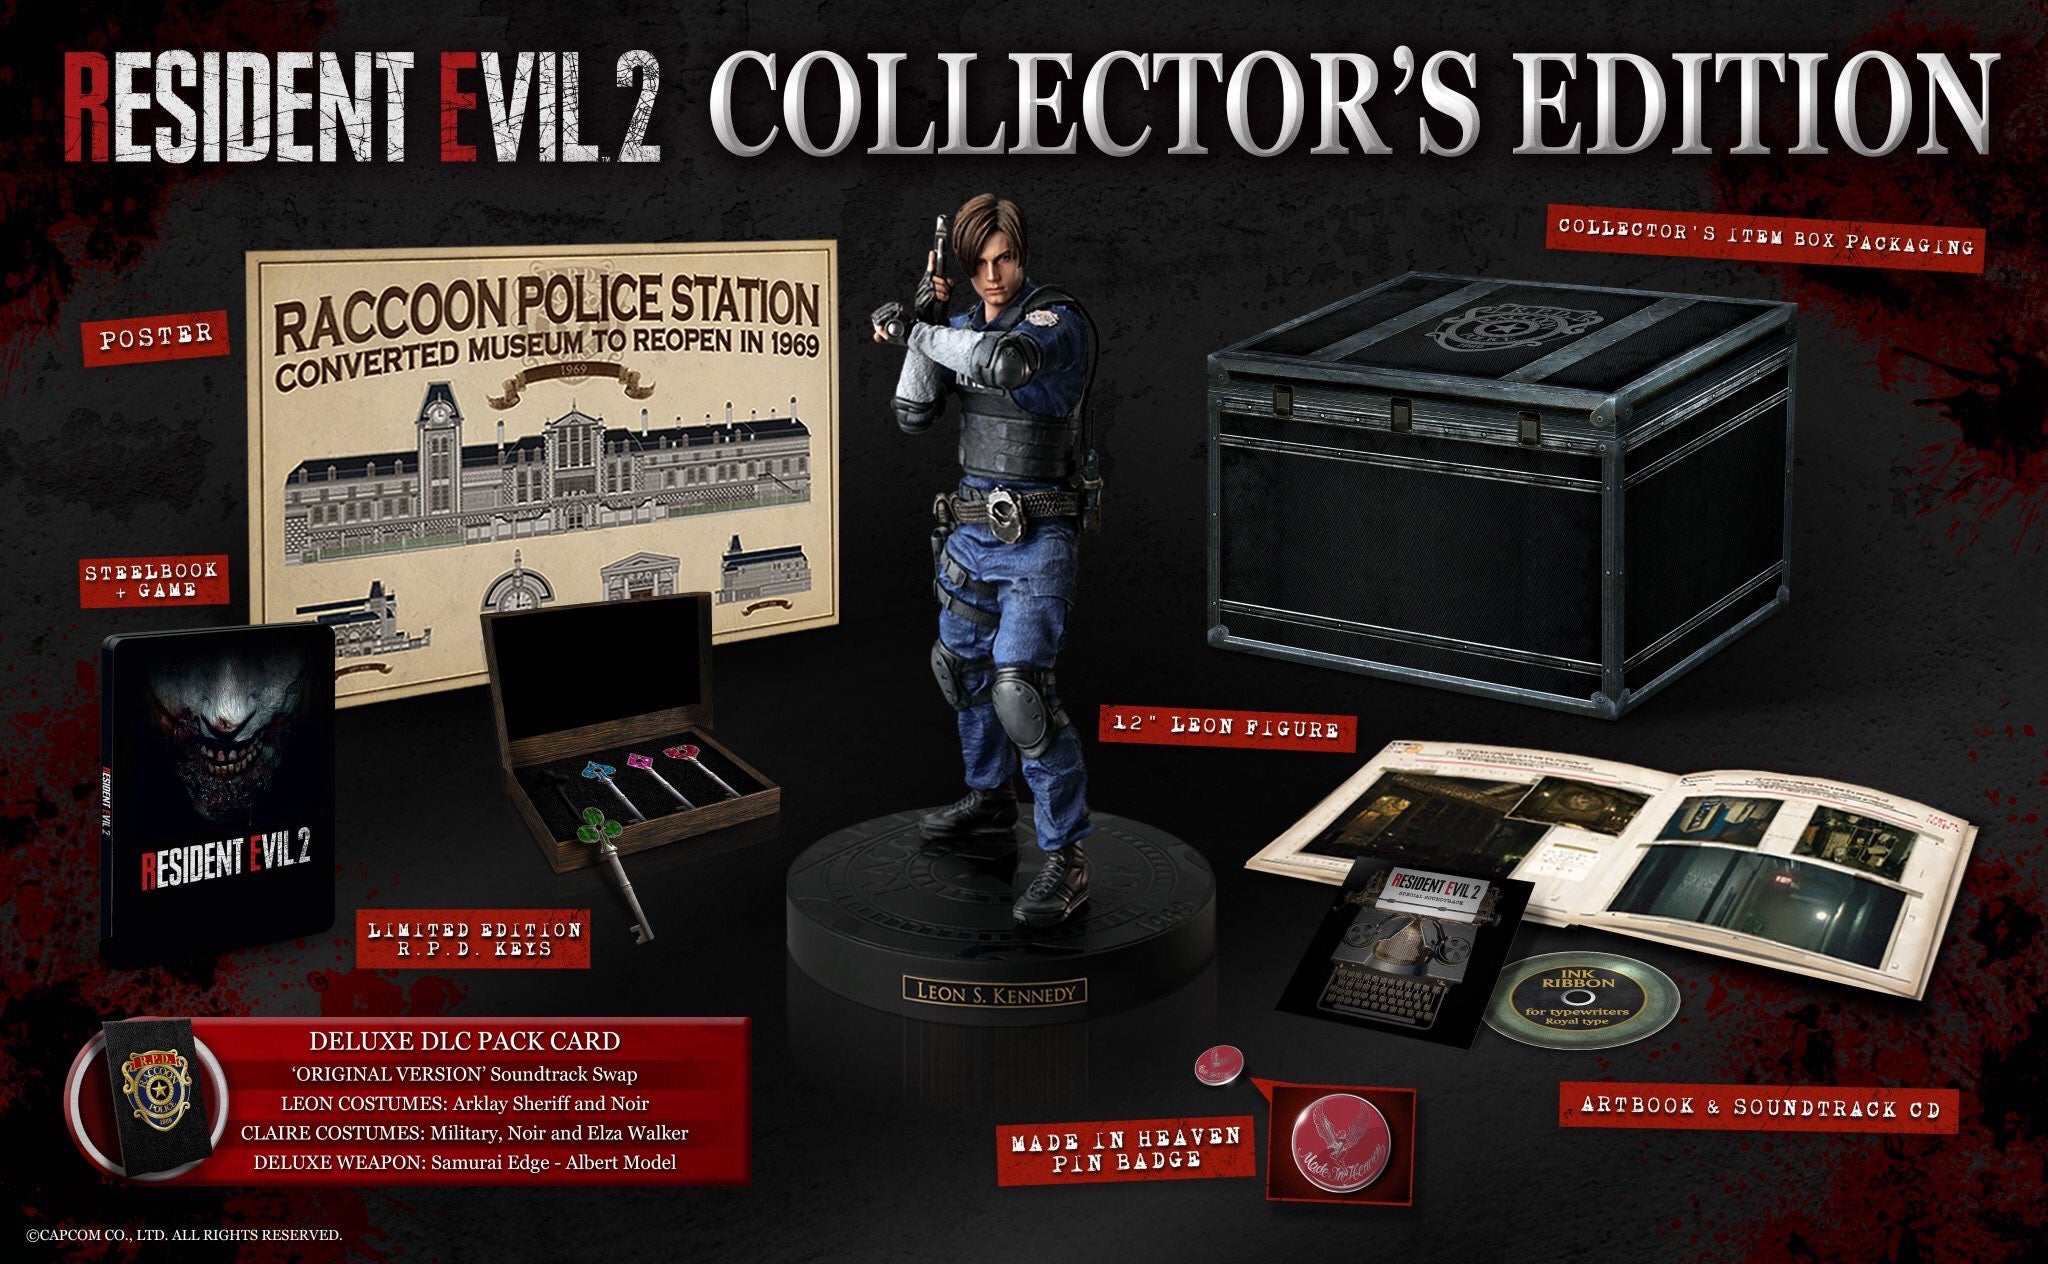 Resident Evil 2's UK Collector's Edition contains a 12